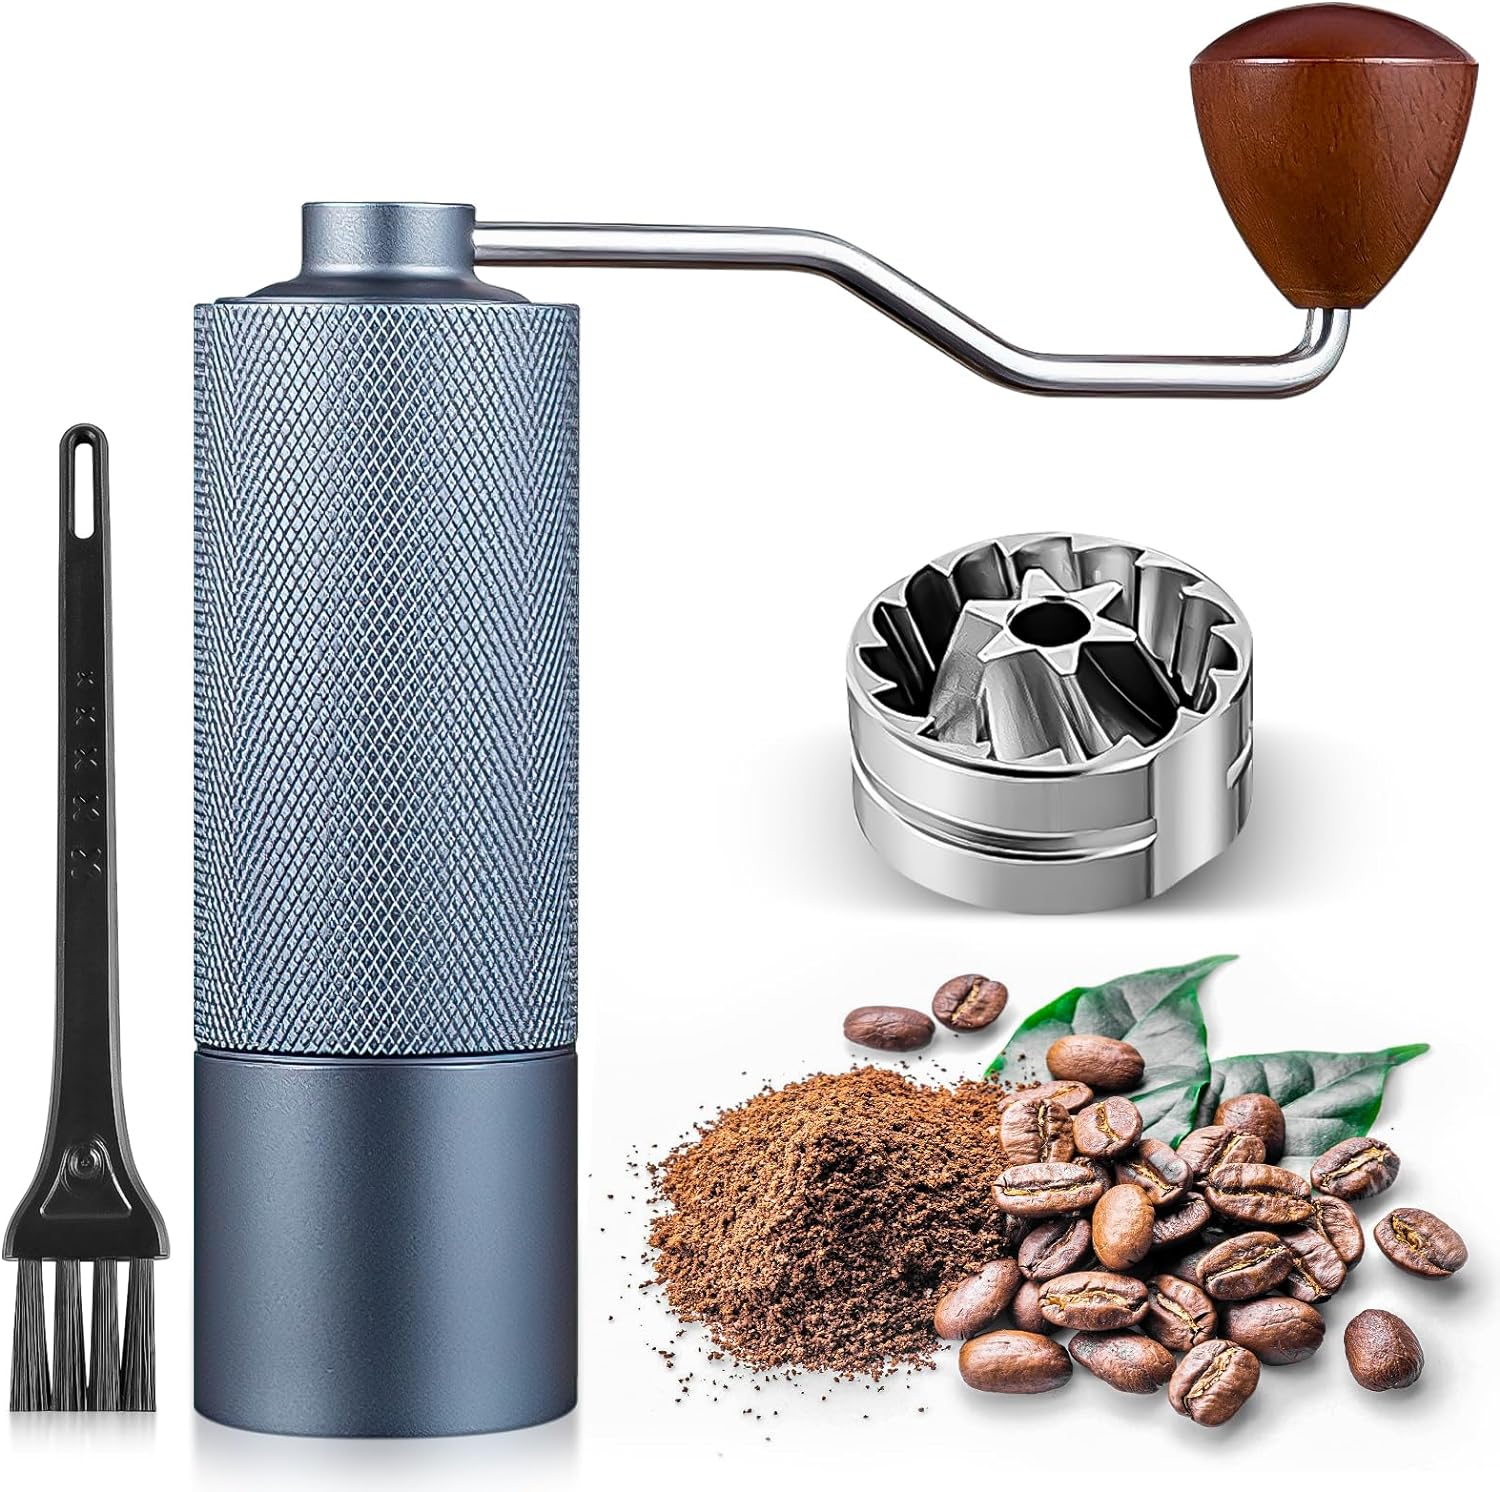 Manual Coffee Grinder Made of Stainless Steel | Stainless Steel Mill With Precise Grinding Level Adjustment | Removable handle | Conical Grinder | For espresso to French press - Light Blue